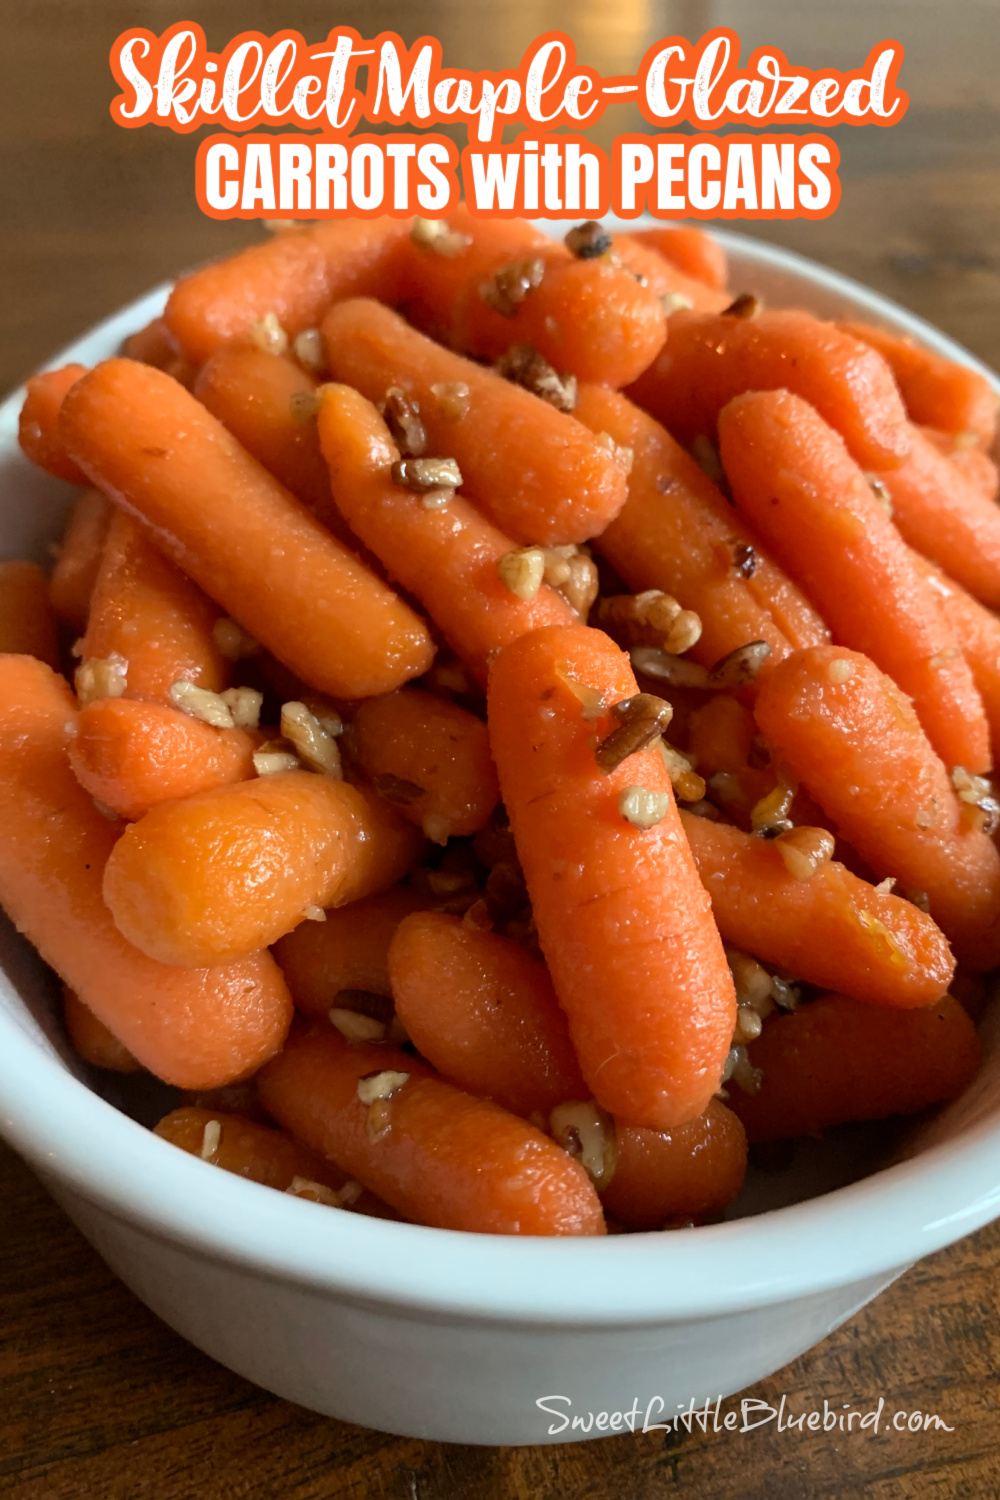 Photo of Skillet Maple-Glazed Carrots with Pecans in a white serving dish, by Sweet Little Bluebird